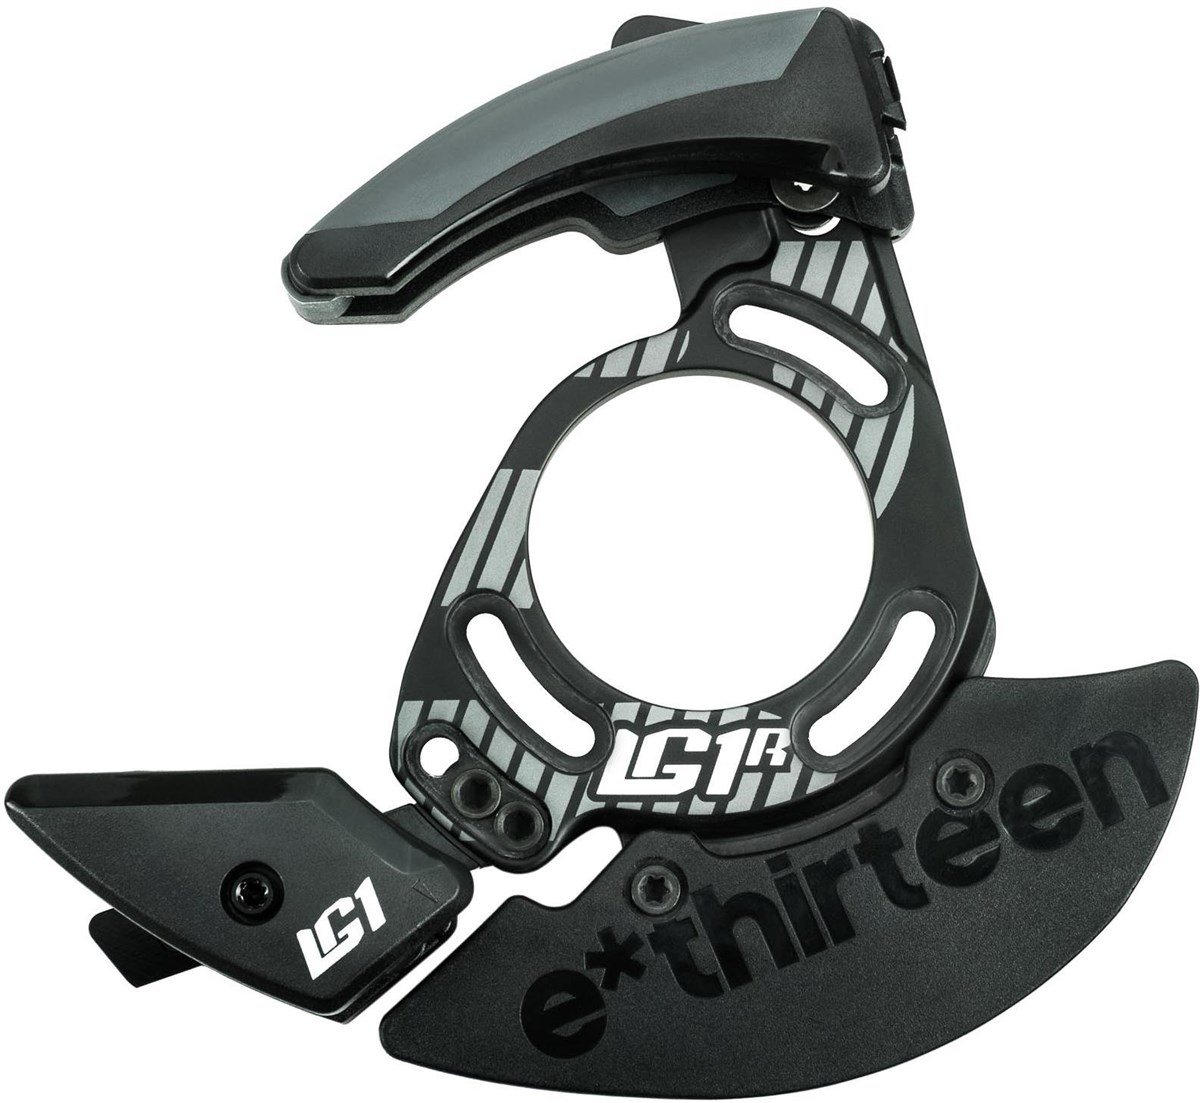 E-Thirteen LG1 Race Carbon Chain Guide product image